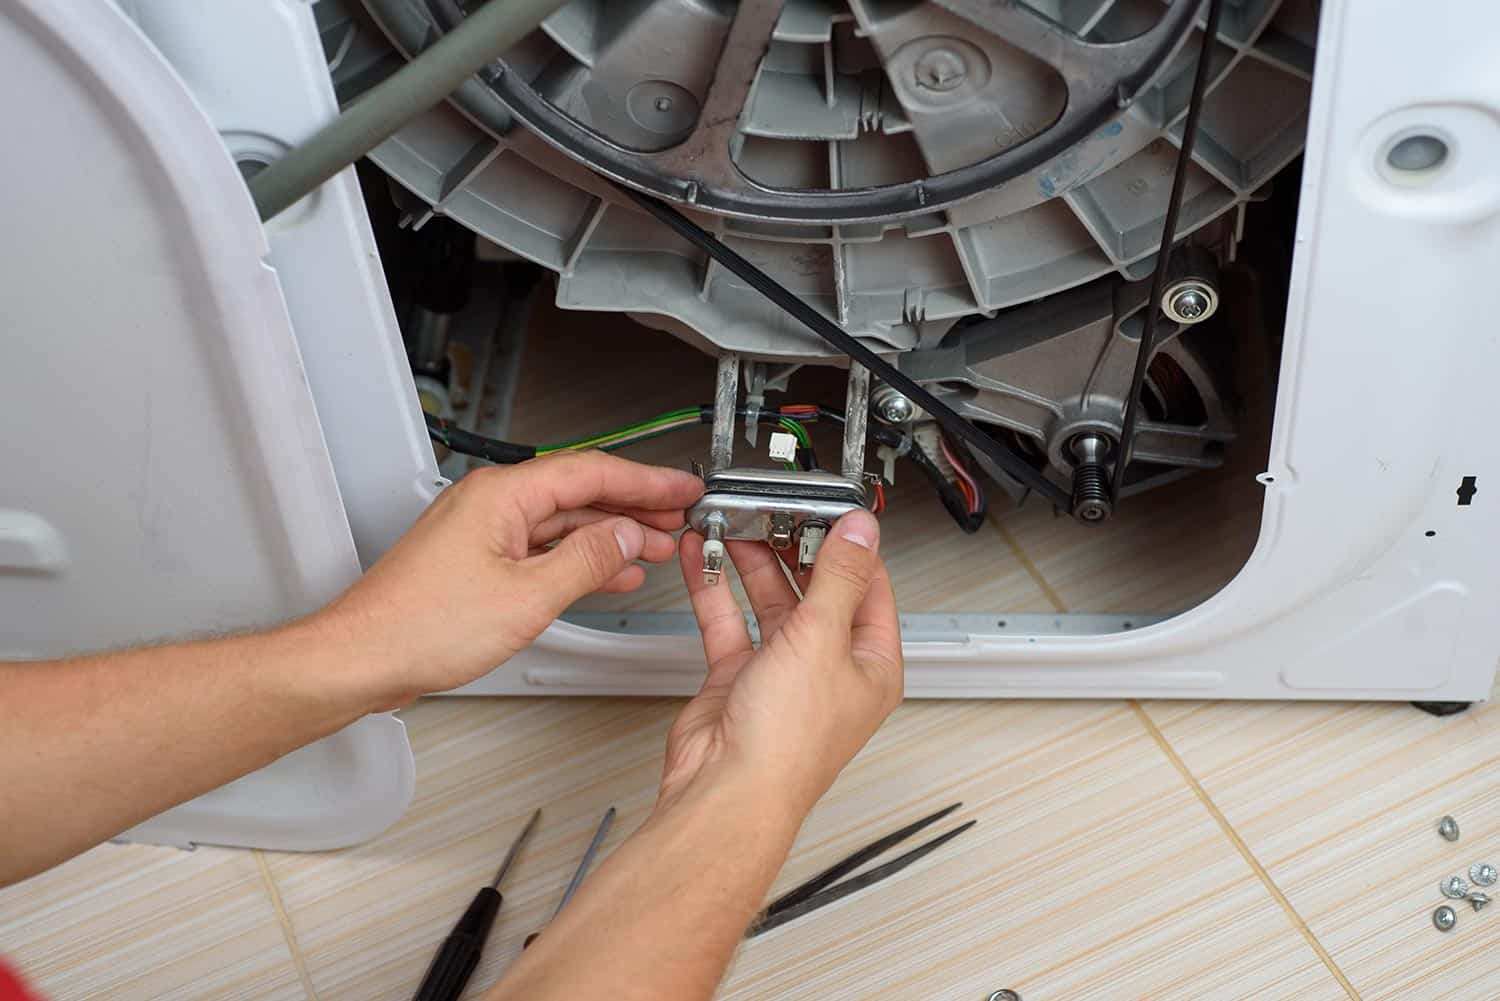 Handyman repairs the washer machine with wrench and screwdriver